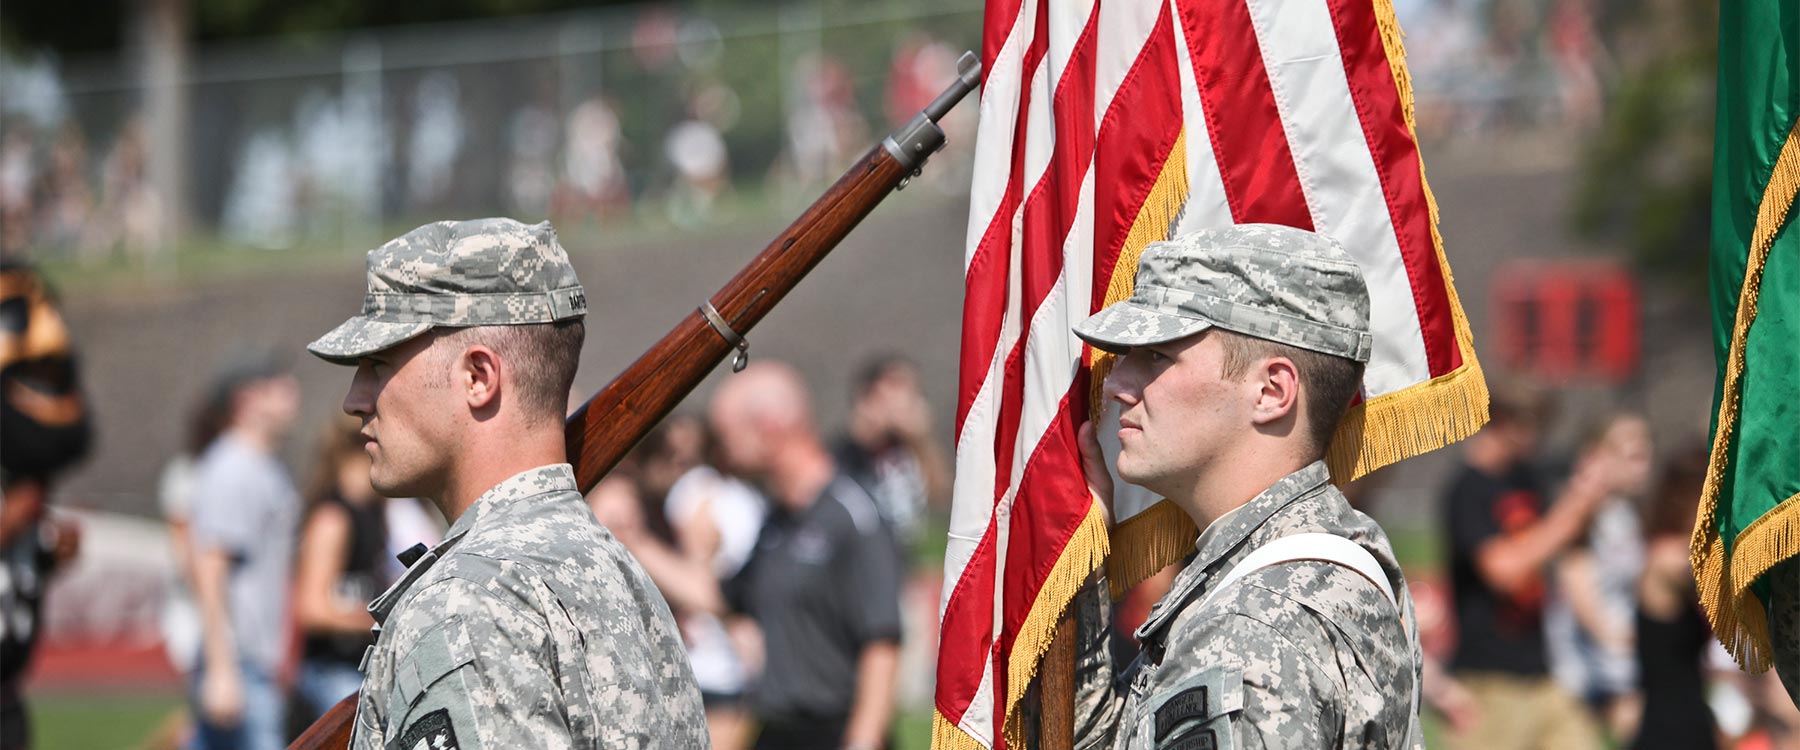 Two ROTC officers stand in a line. One caries a rifle, the other caries the American flag.